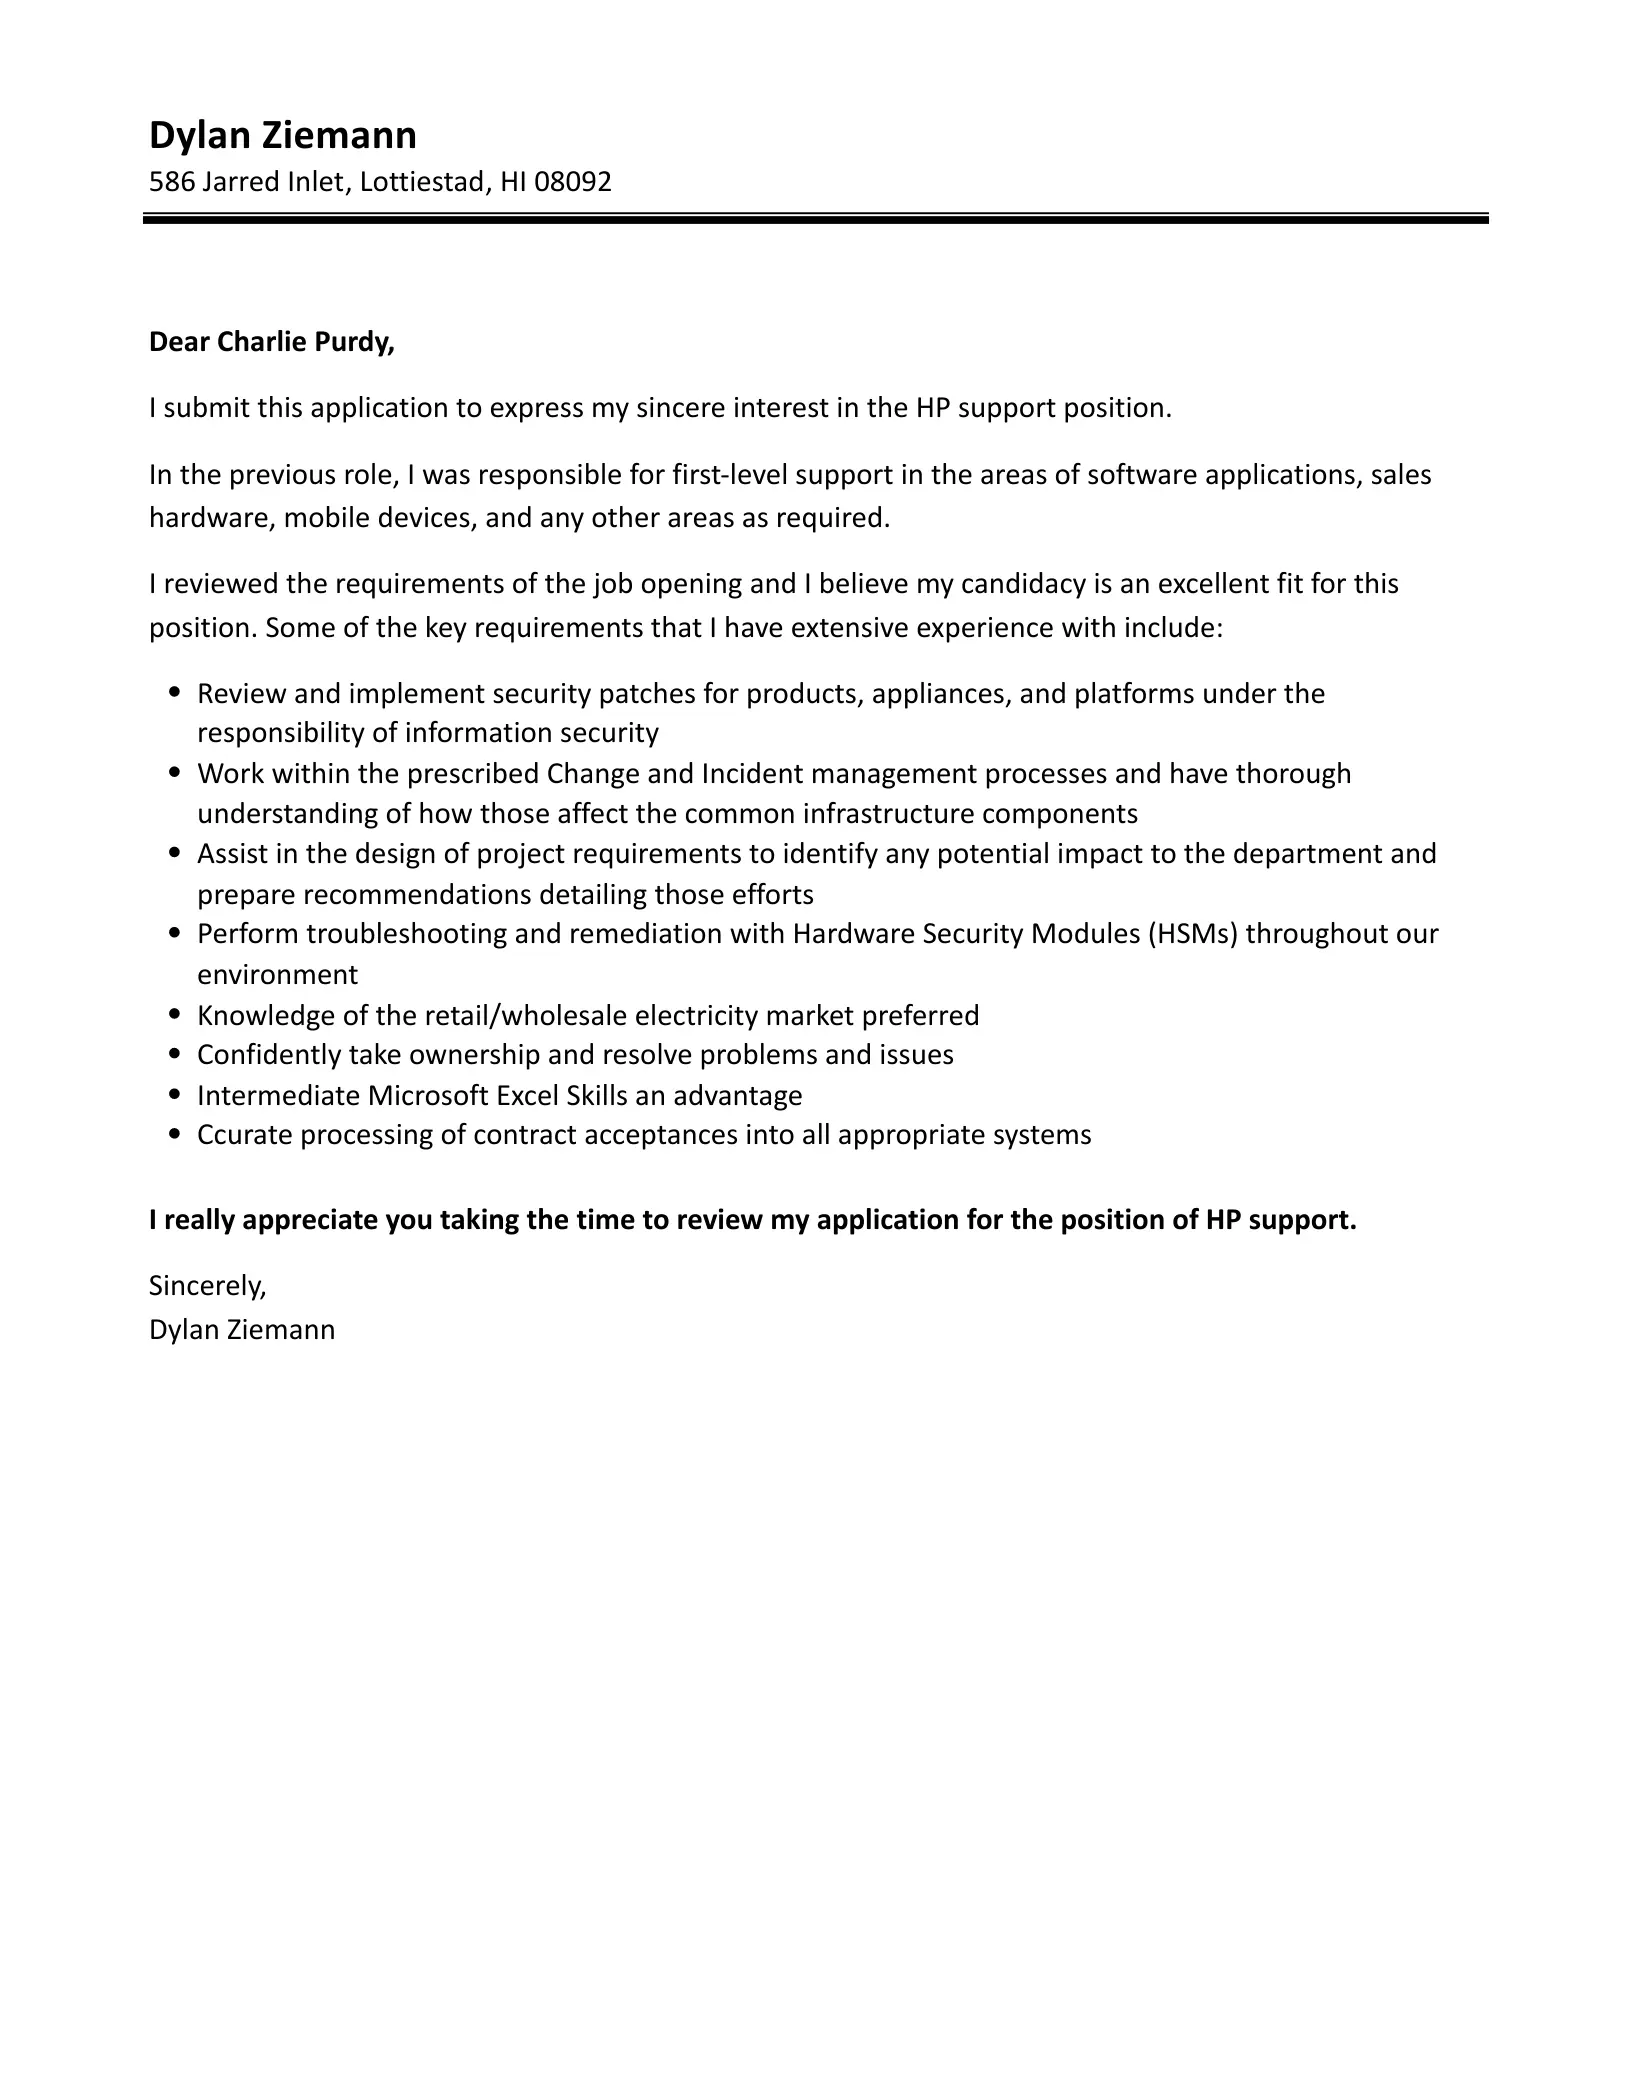 cover letter for hewlett packard - How do you write a powerful cover letter